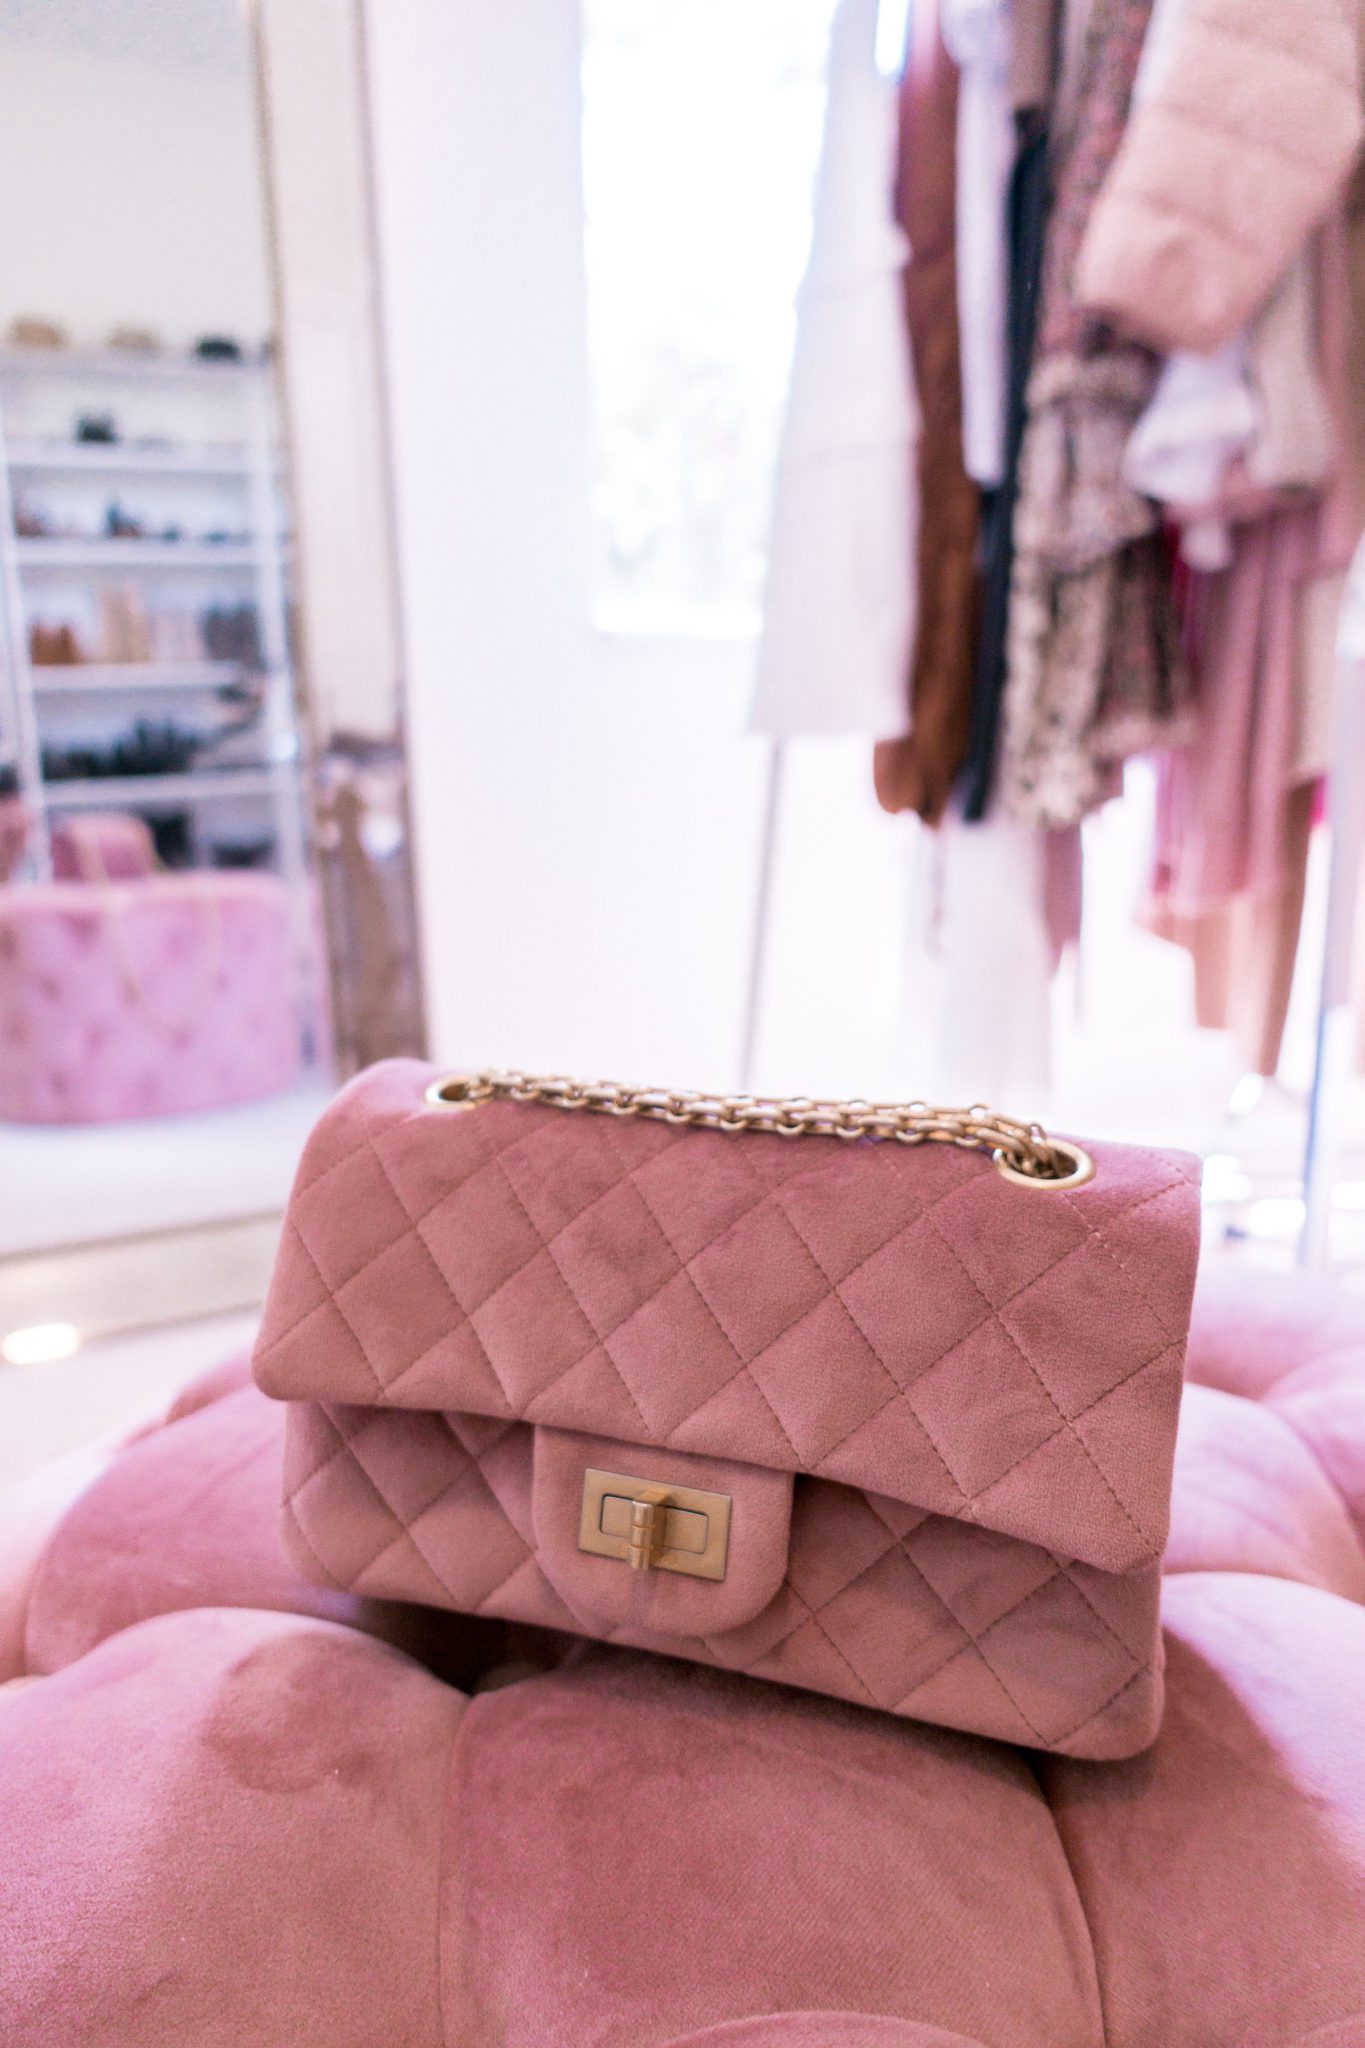 The story and details behind the Chanel 2.55 handbag